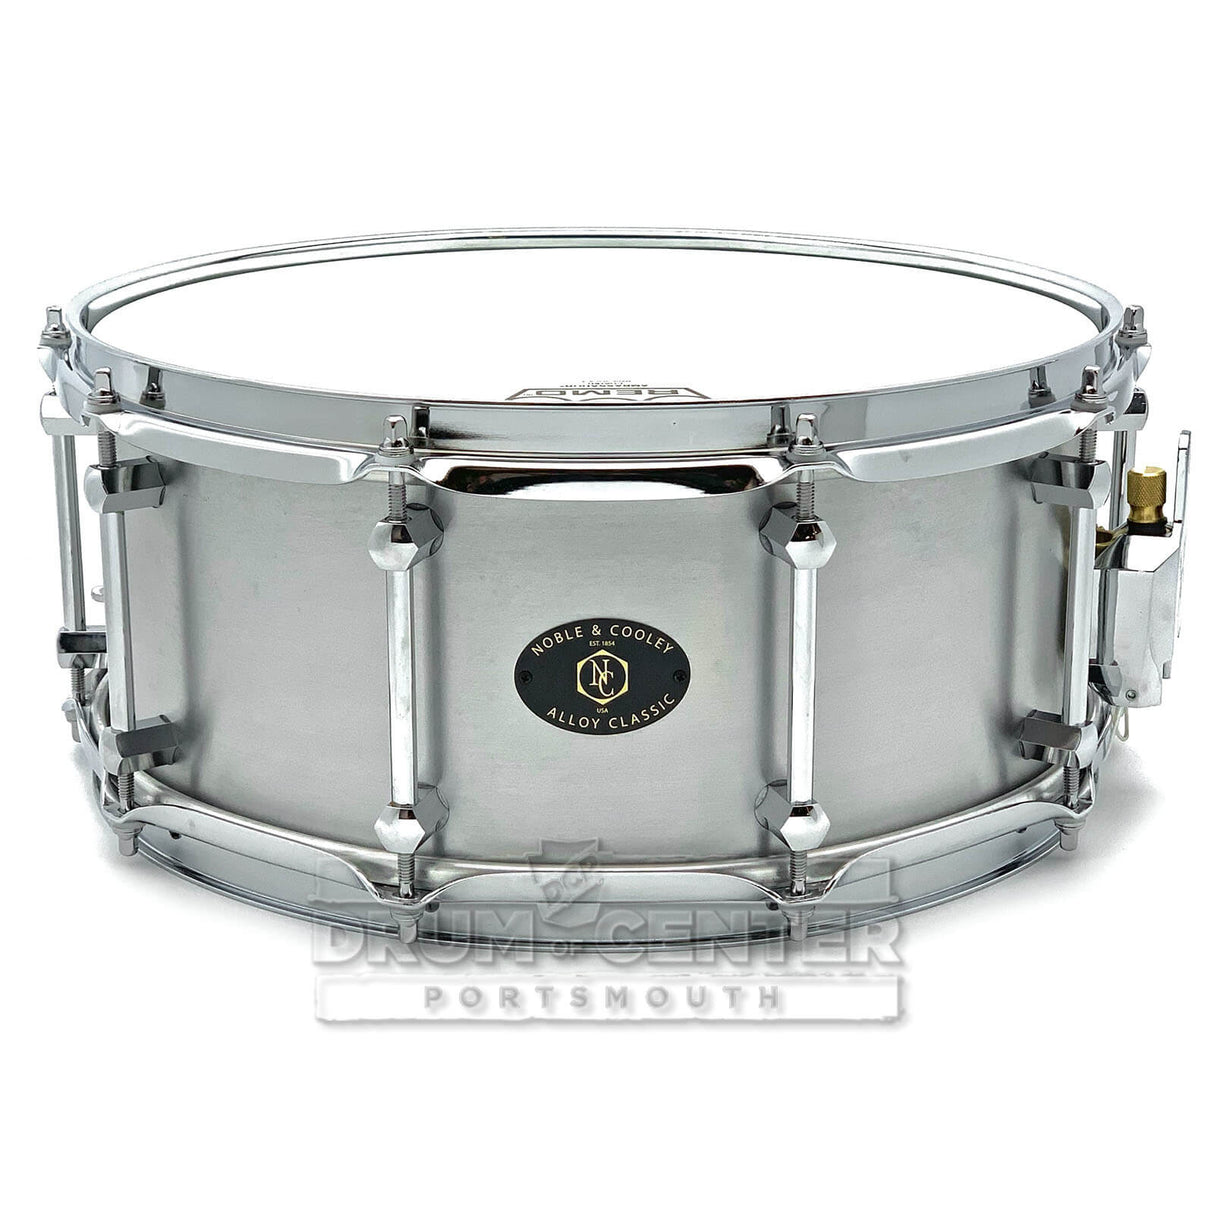 Noble & Cooley Alloy Classic Snare Drum 14x6 Raw/Chrome - Drum Center Of Portsmouth